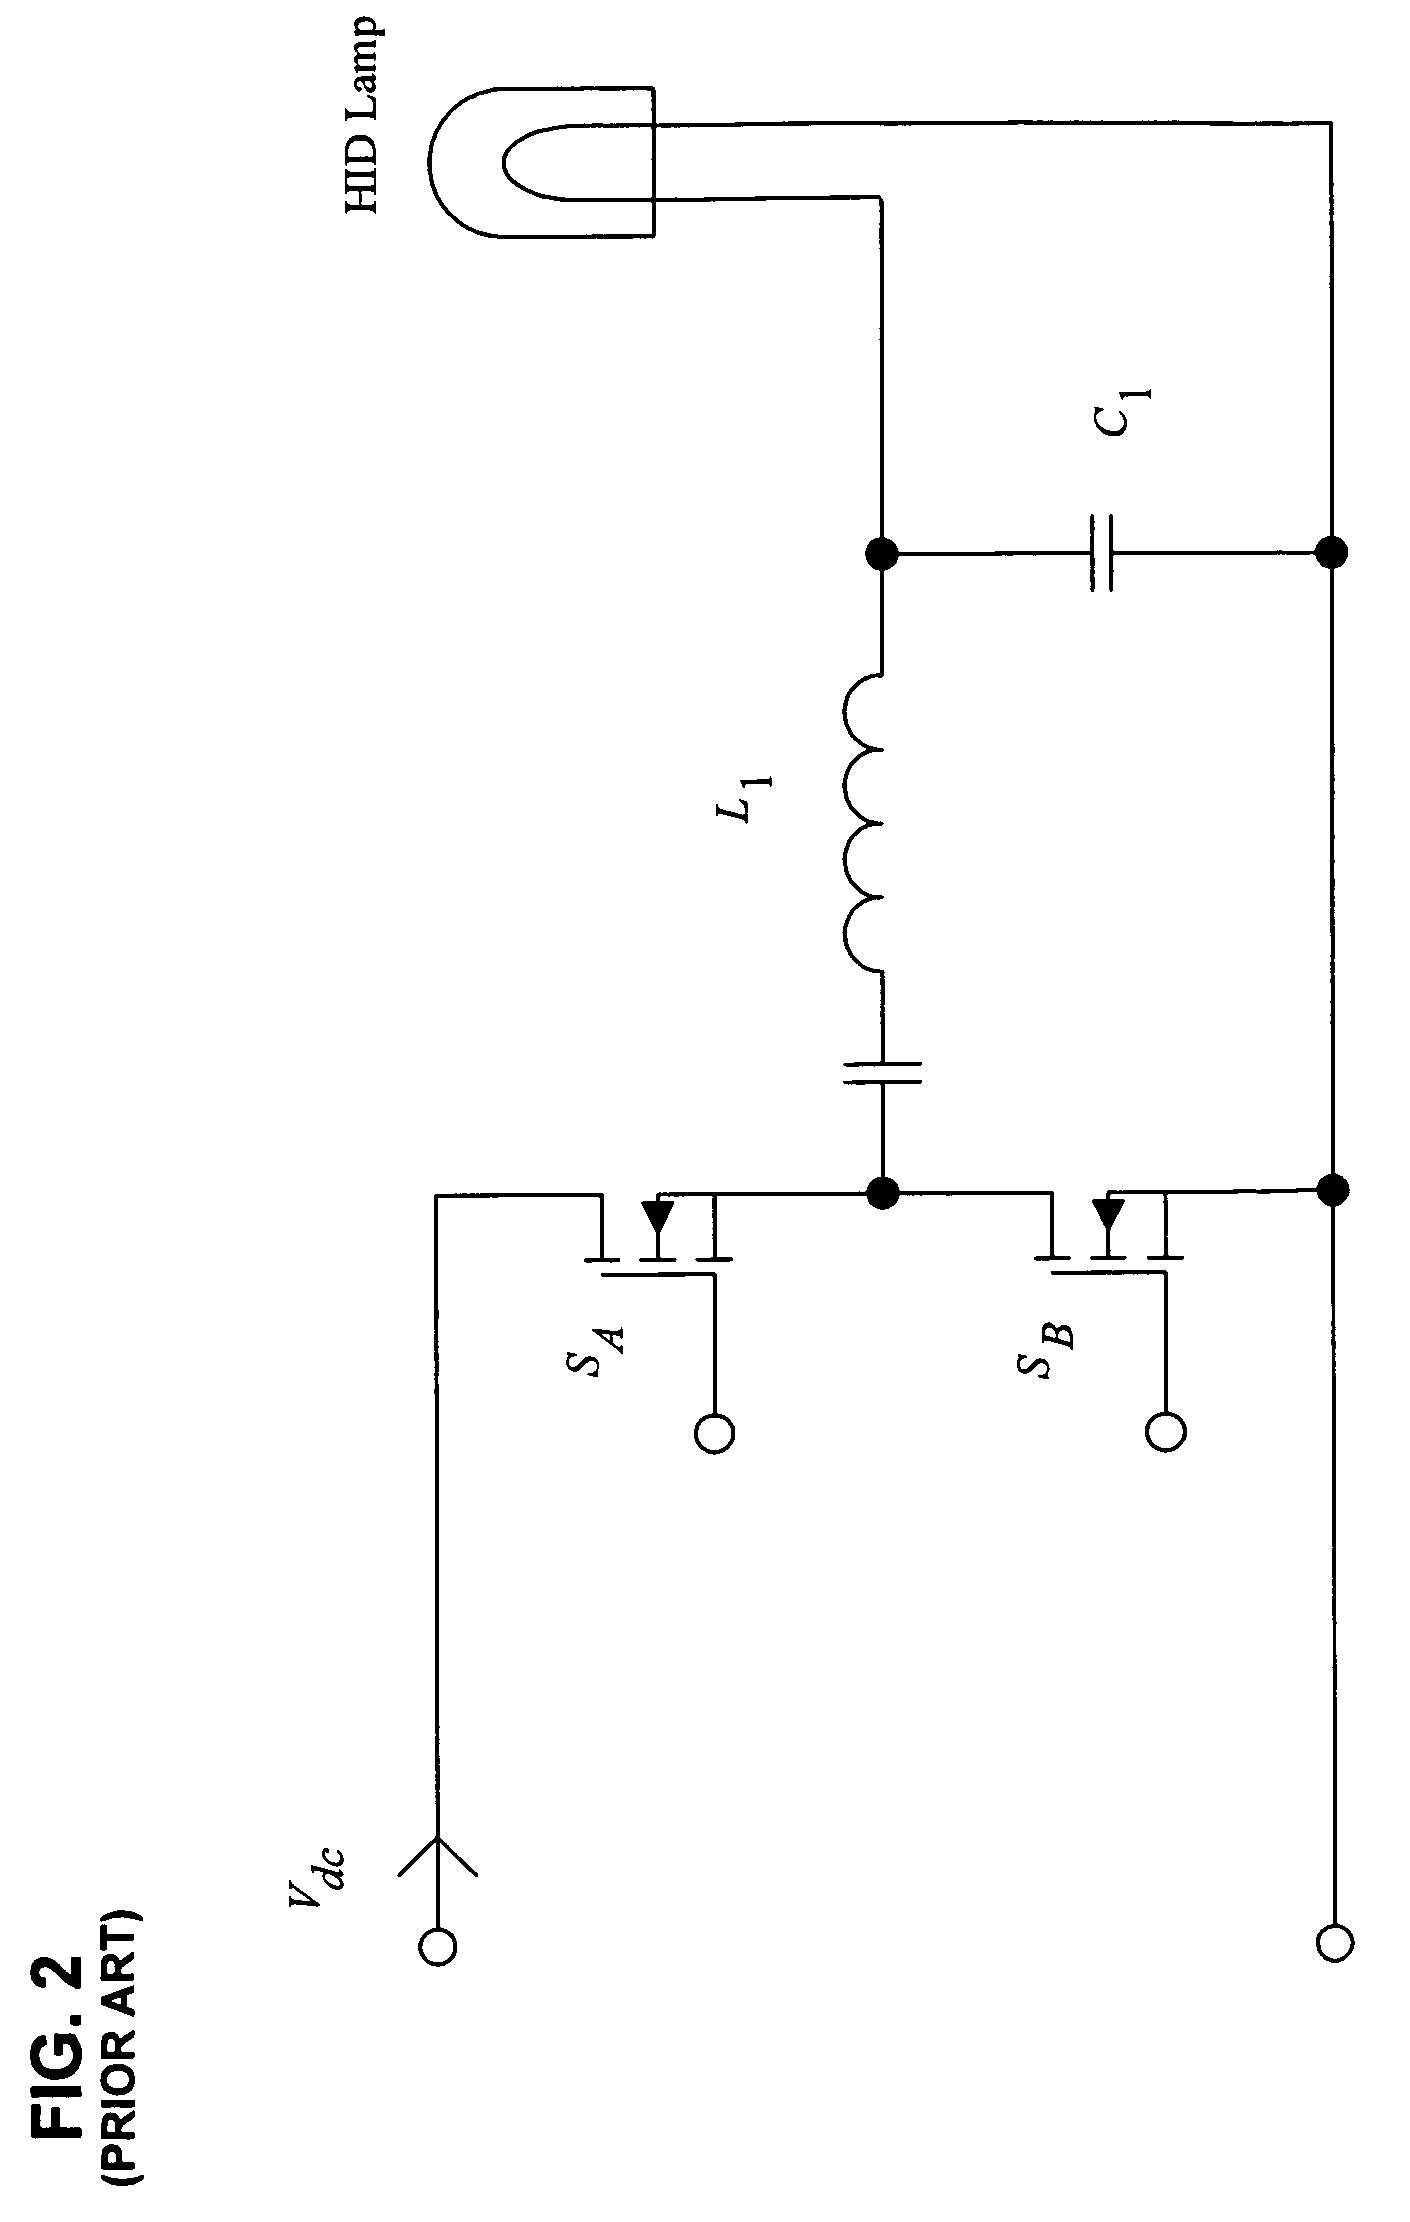 Circuit designs and control techniques for high frequency electronic ballasts for high intensity discharge lamps